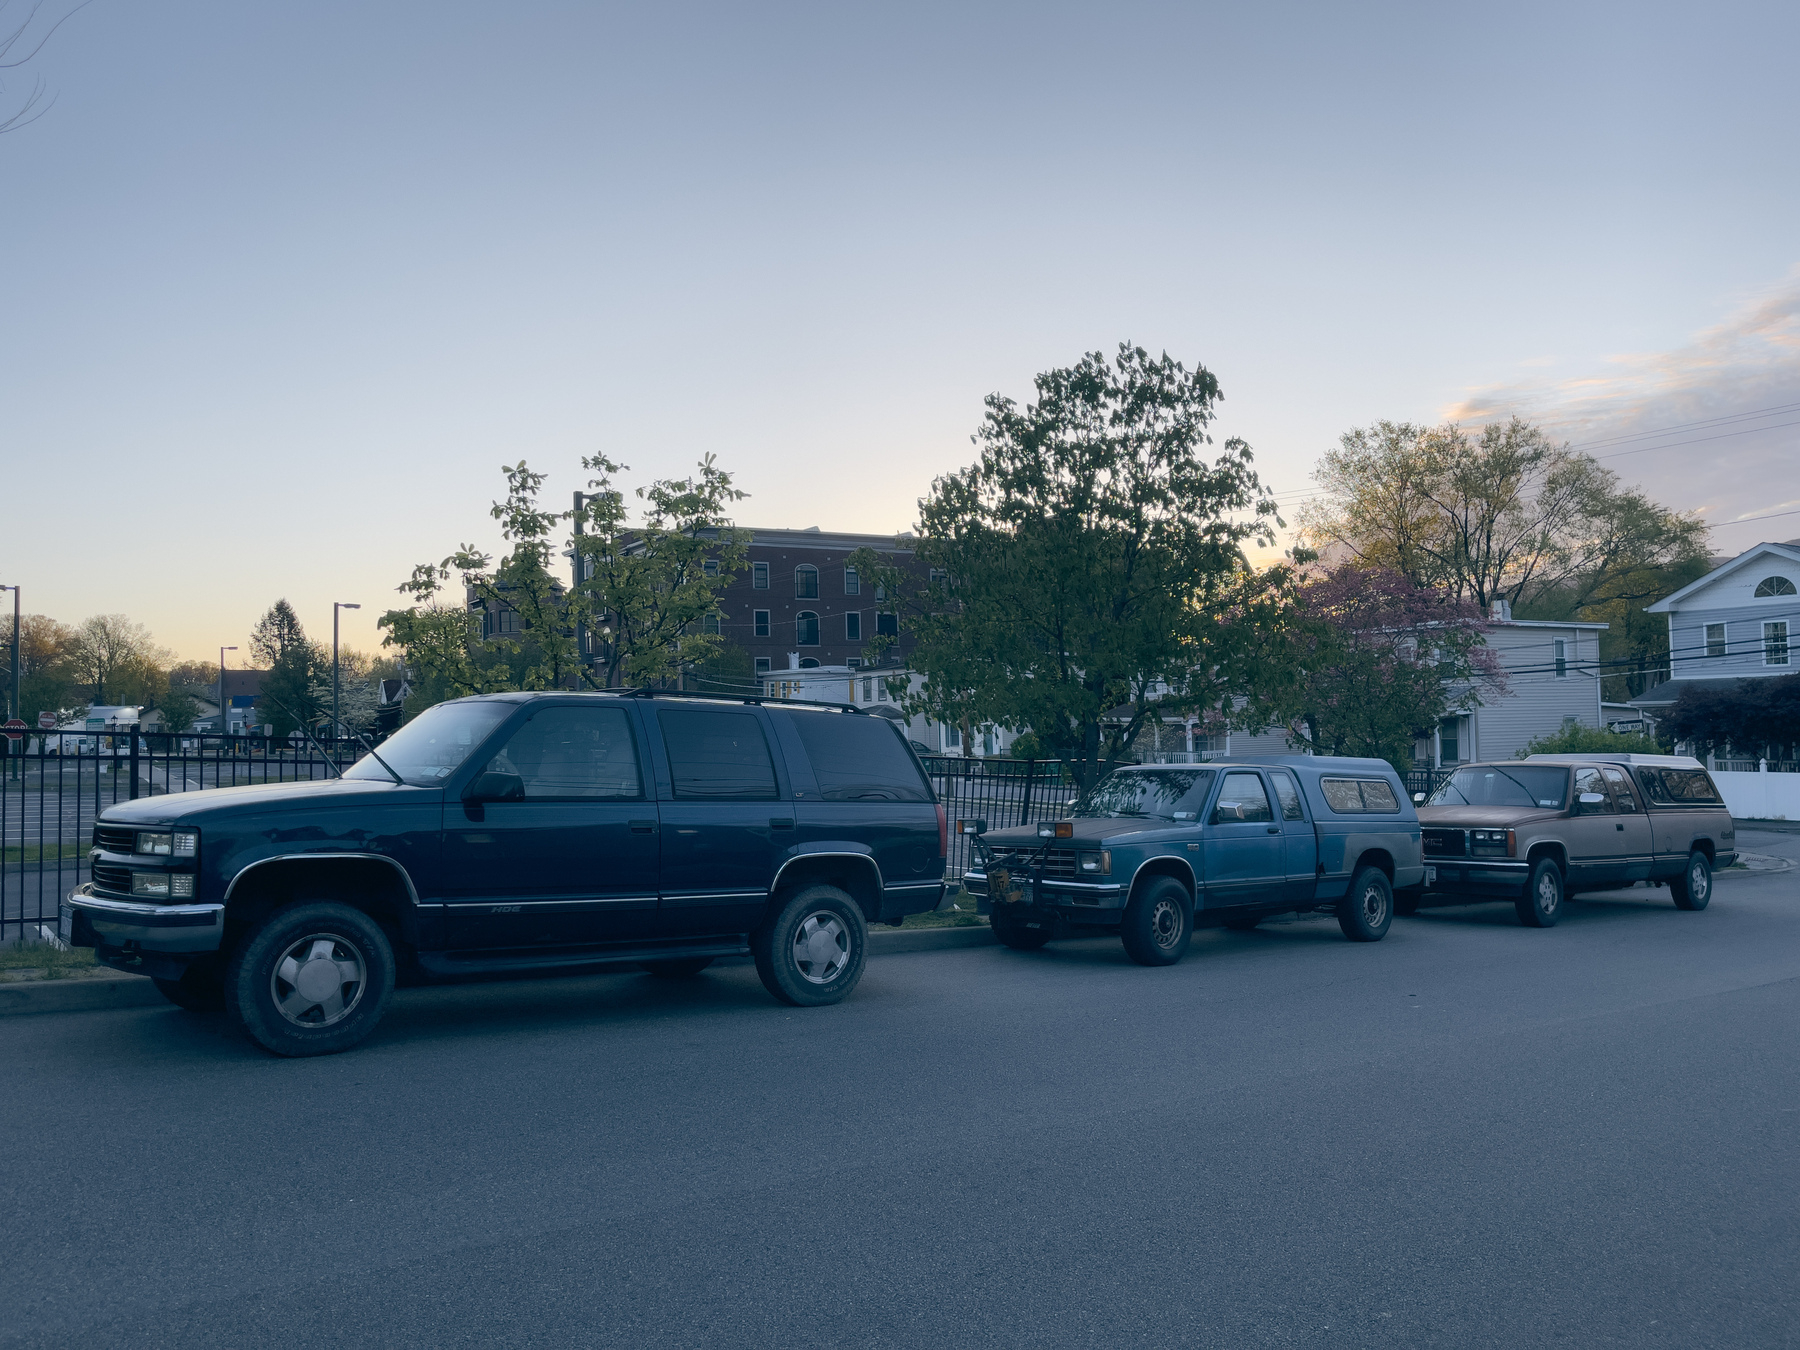 Three old pickup trucks in a row. Streetscape early morning.